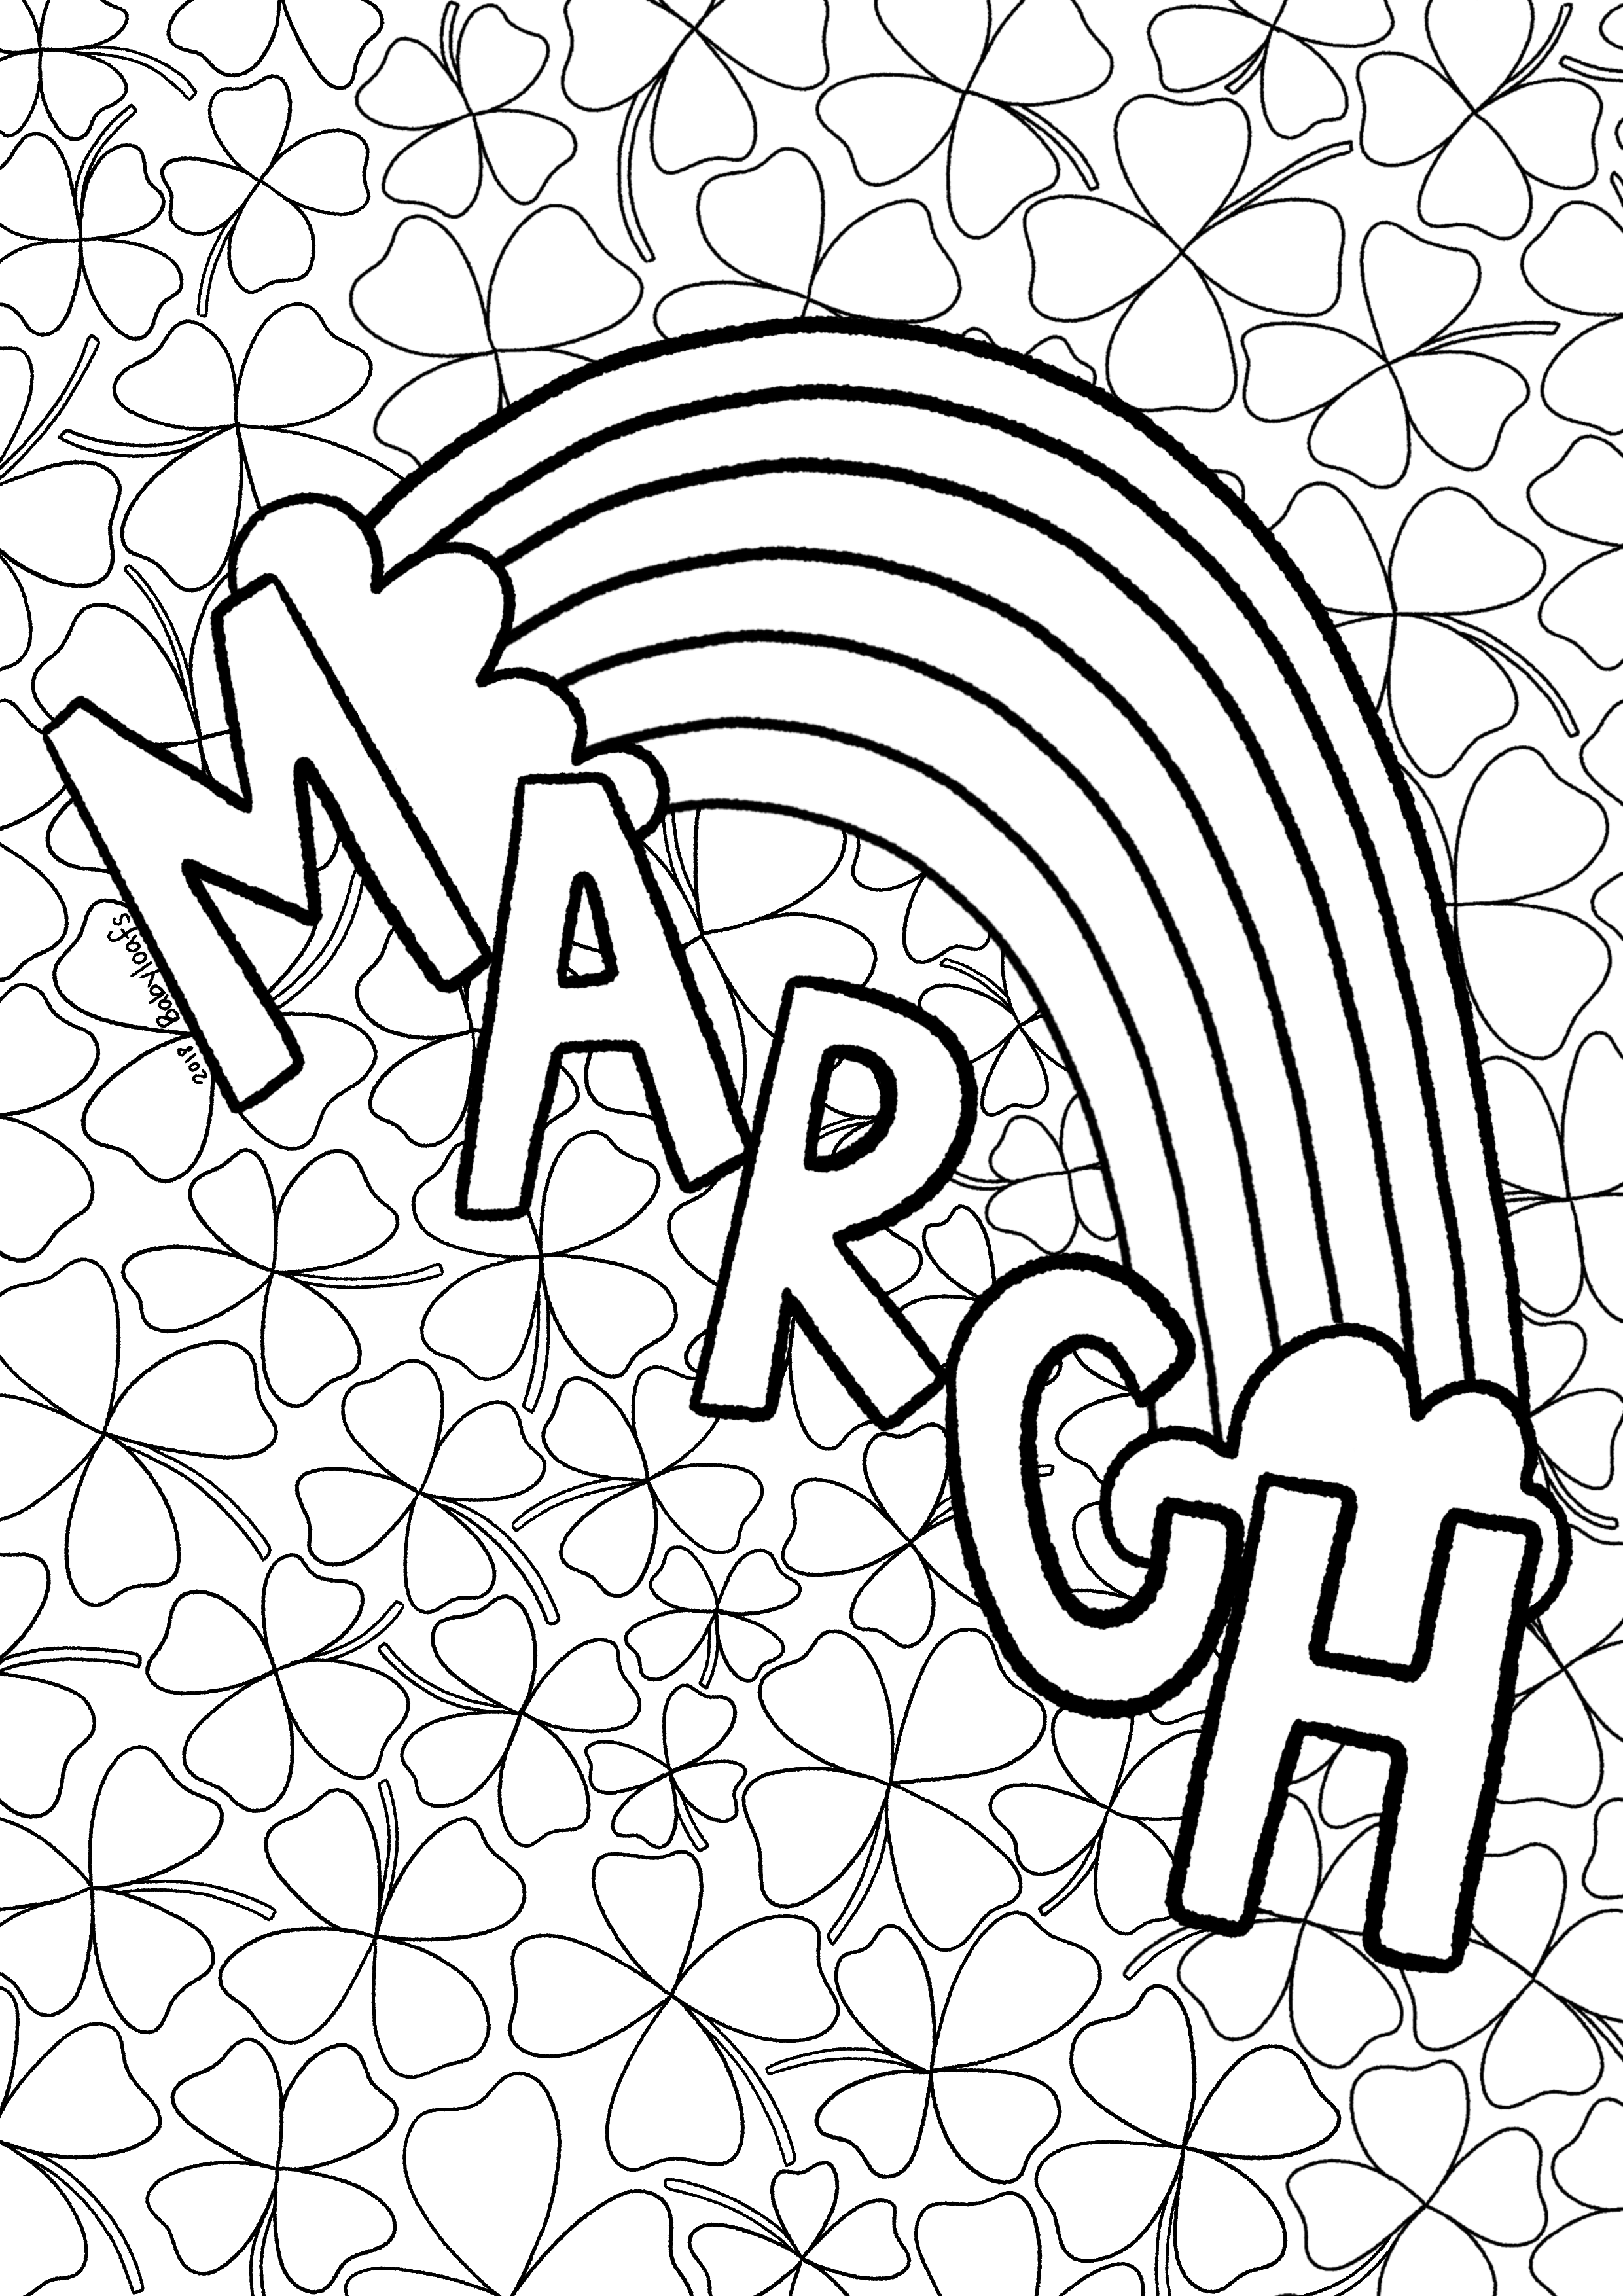 March Rainbow Coloring Sheet | Donuts and Drama